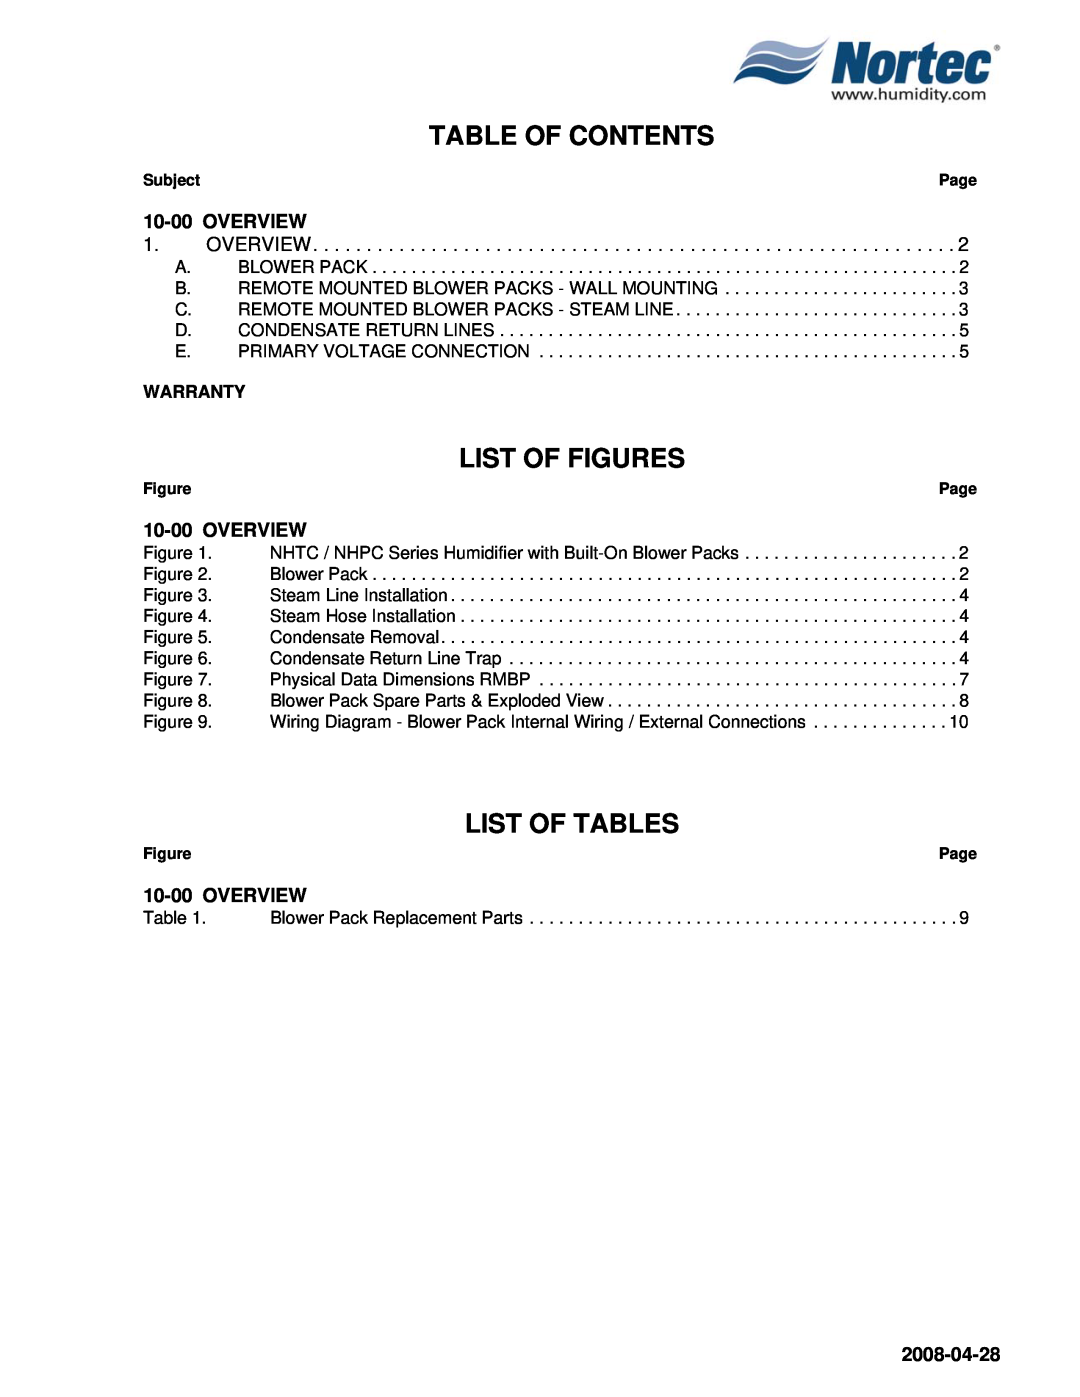 Nortec 380V installation manual Table Of Contents, List Of Figures, List Of Tables, 10-00OVERVIEW, 2008-04-28, Warranty 